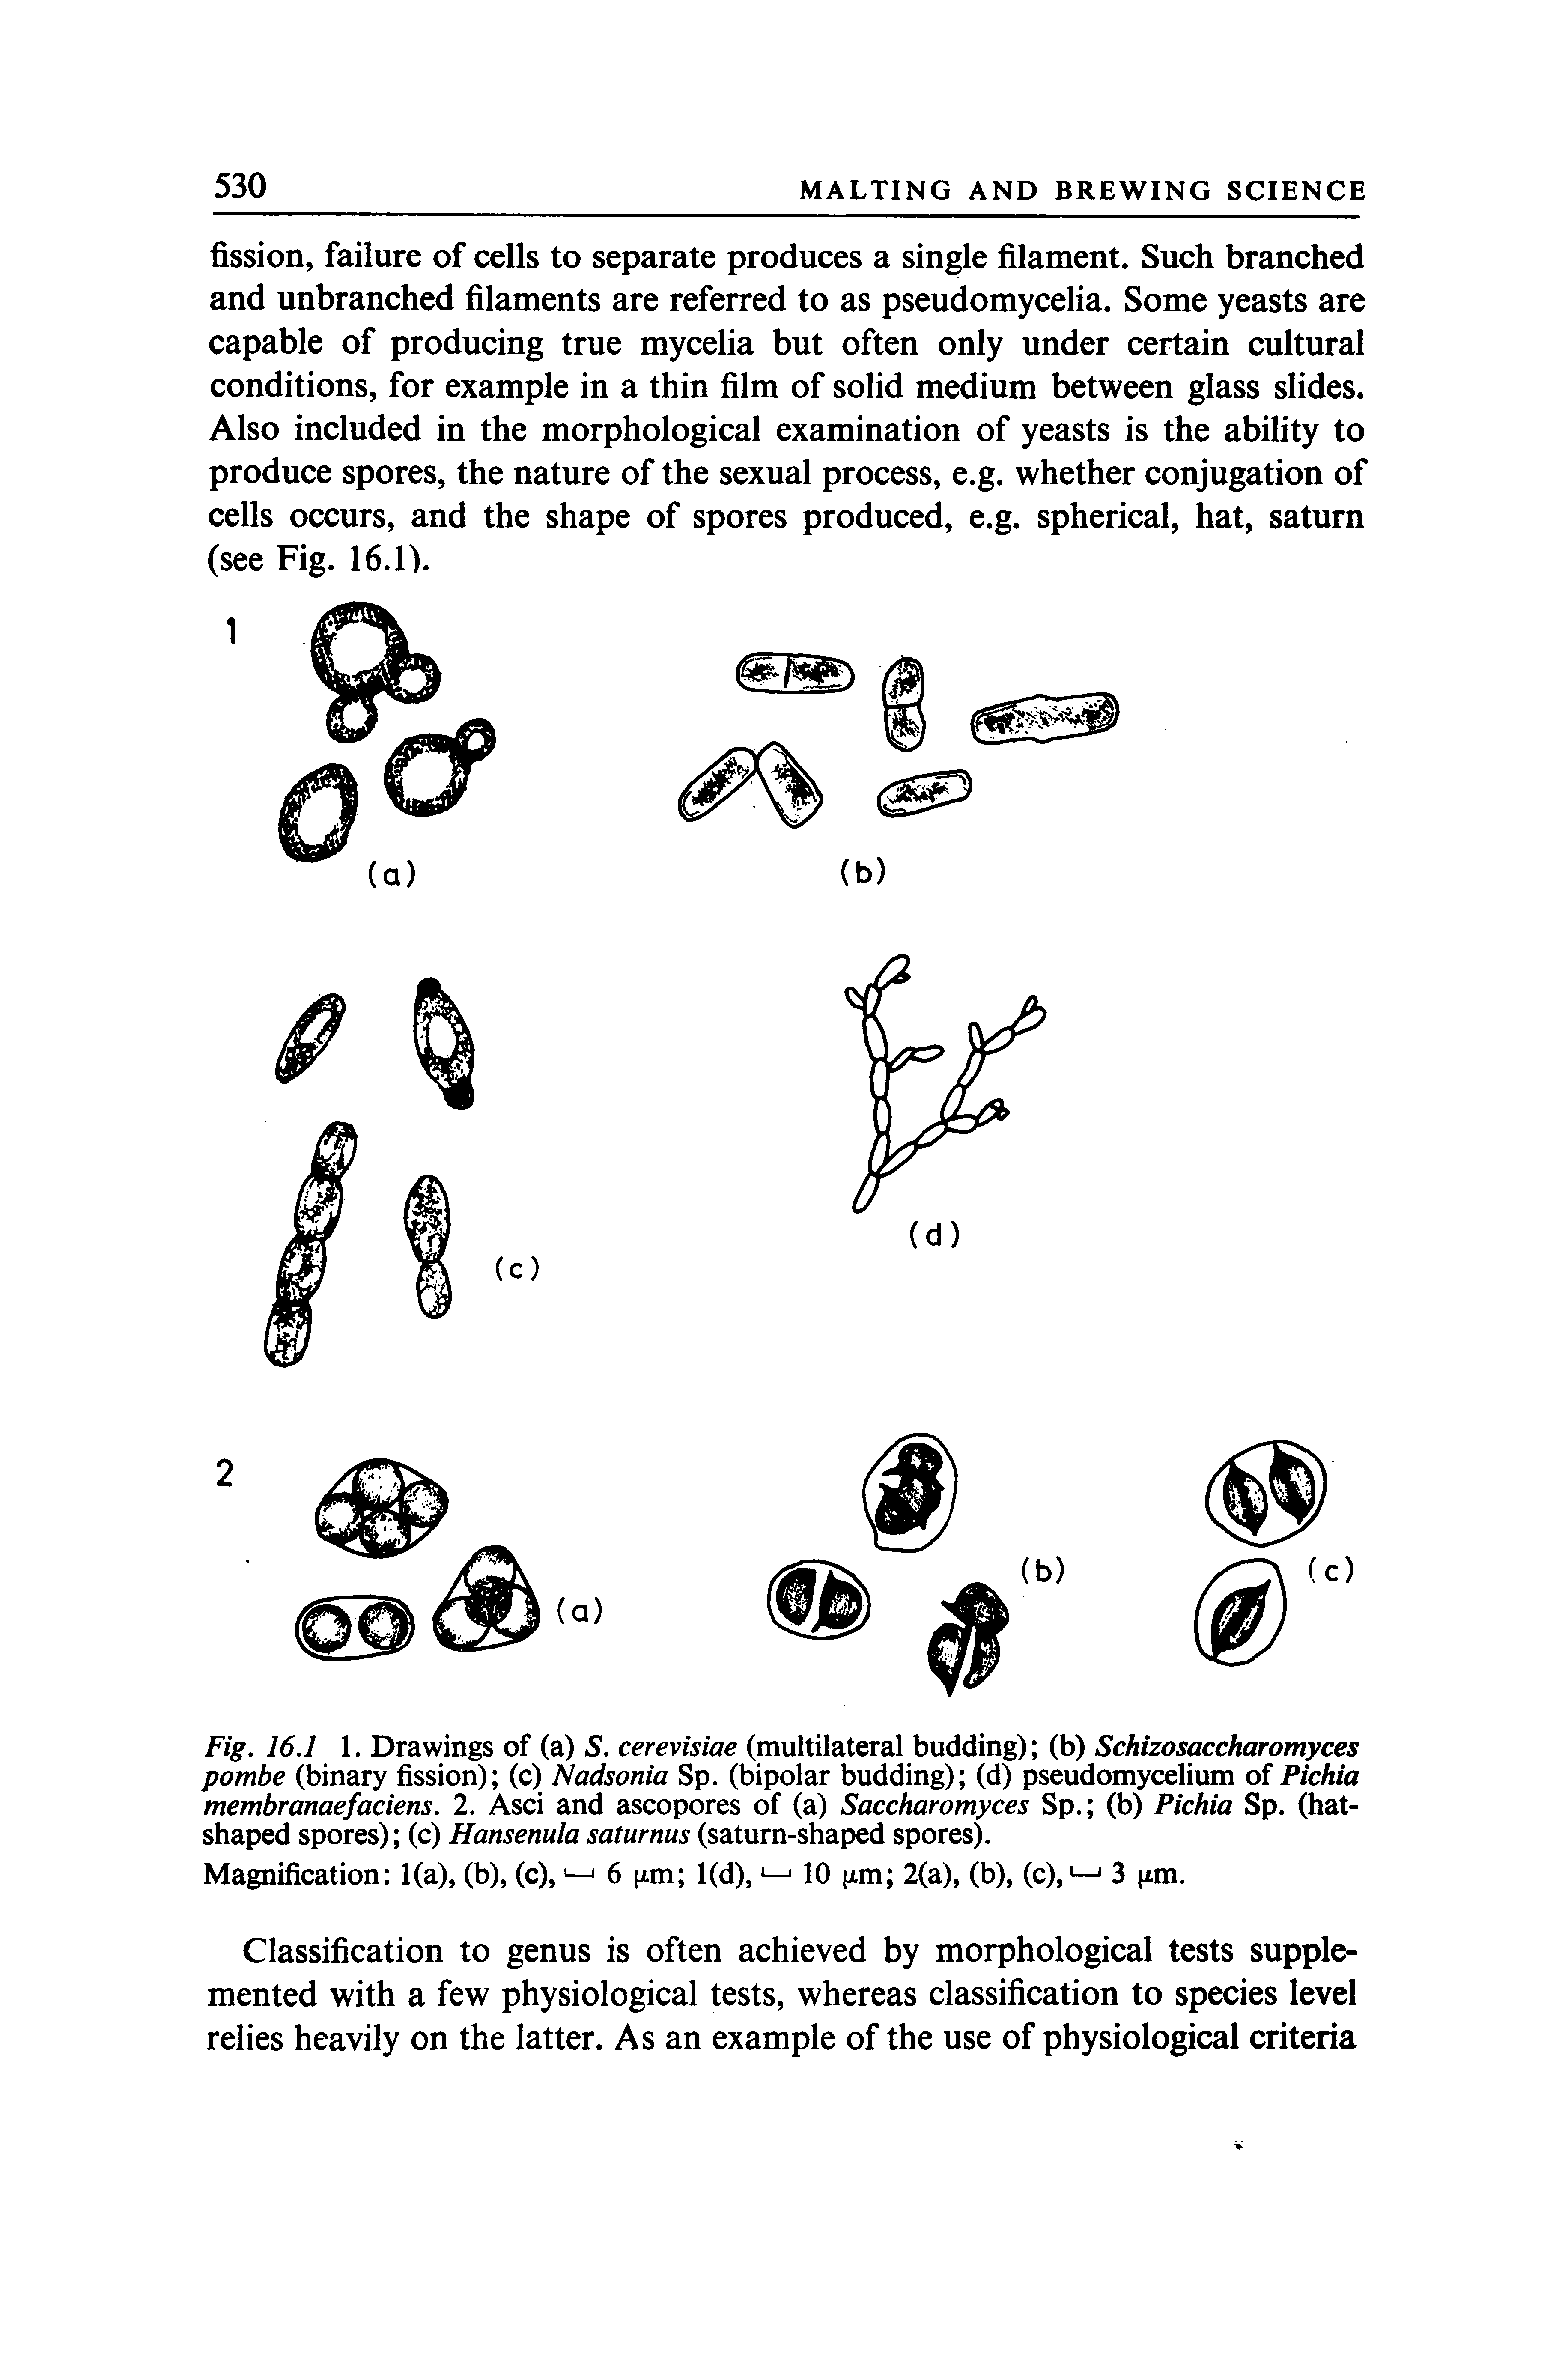 Fig. 16.1 1. Drawings of (a) S. cerevisiae (multilateral budding) (b) Schizosaccharomyces pombe (binary fission) (c) Nadsonia Sp. (bipolar budding) (d) pseudomycelium of Pichia membranaefaciens. 2. Asci and ascopores of (a) Saccharomyces Sp. (b) Pichia Sp. (hatshaped spores) (c) Hansemla saturnus (saturn-shaped spores).